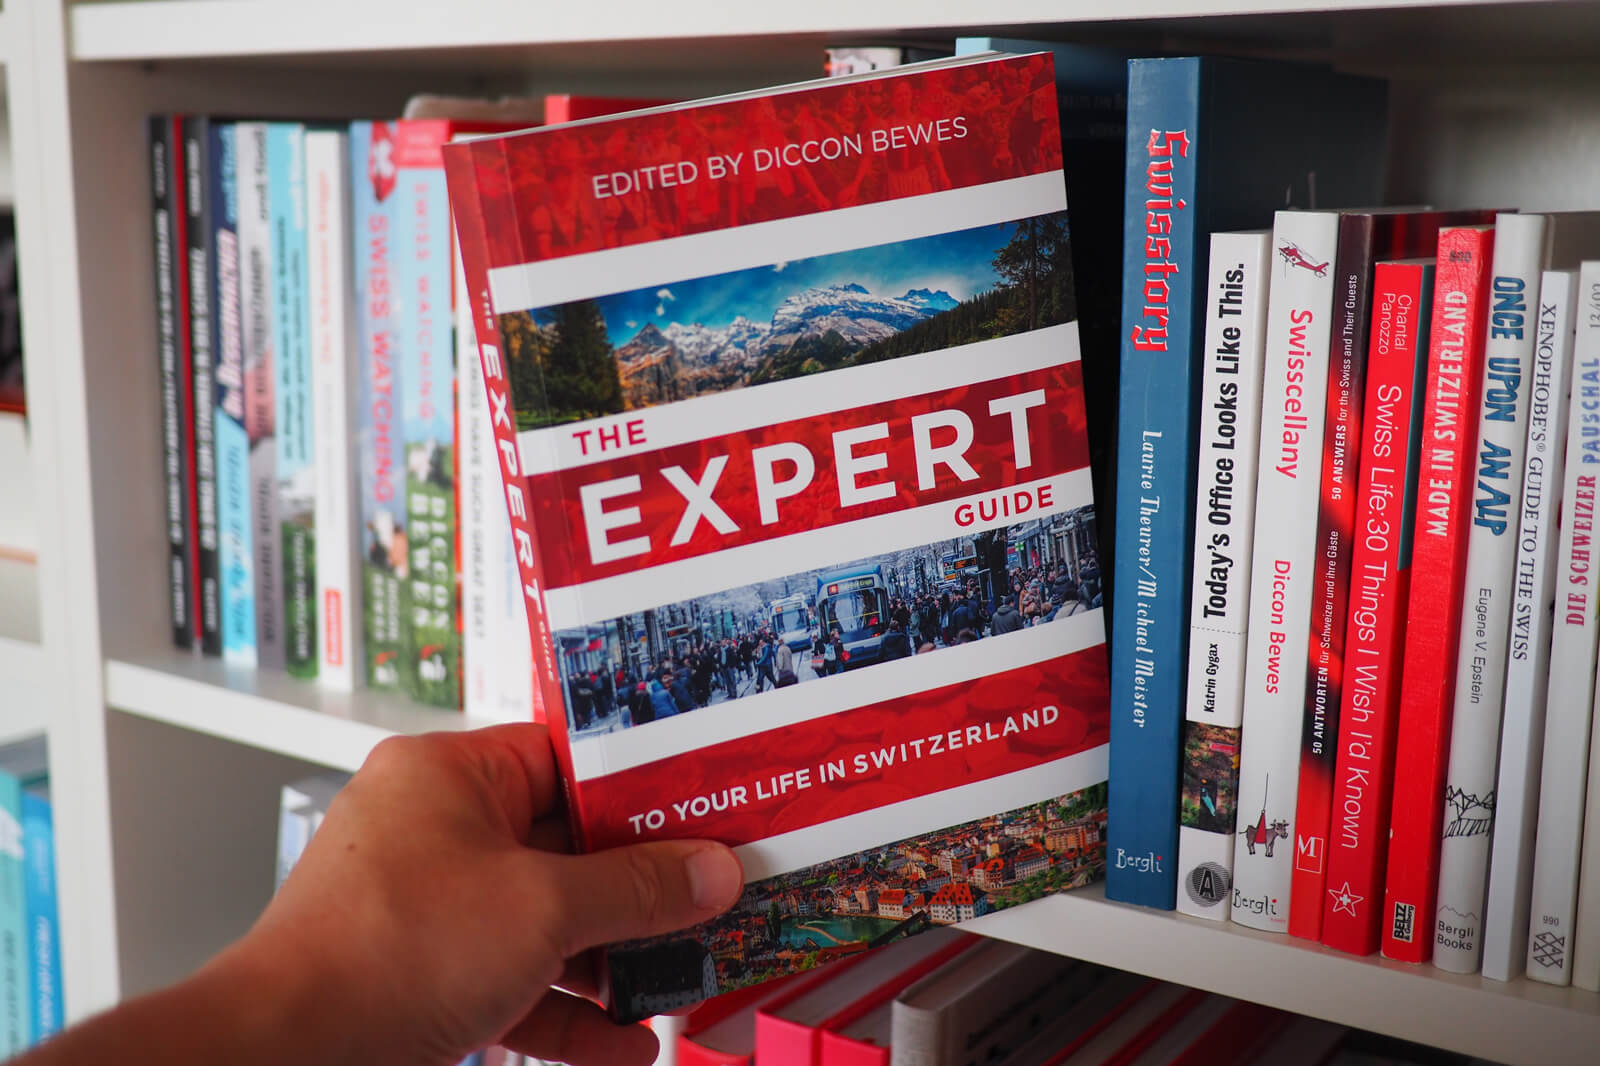 The Expert Guide to your Life in Switzerland